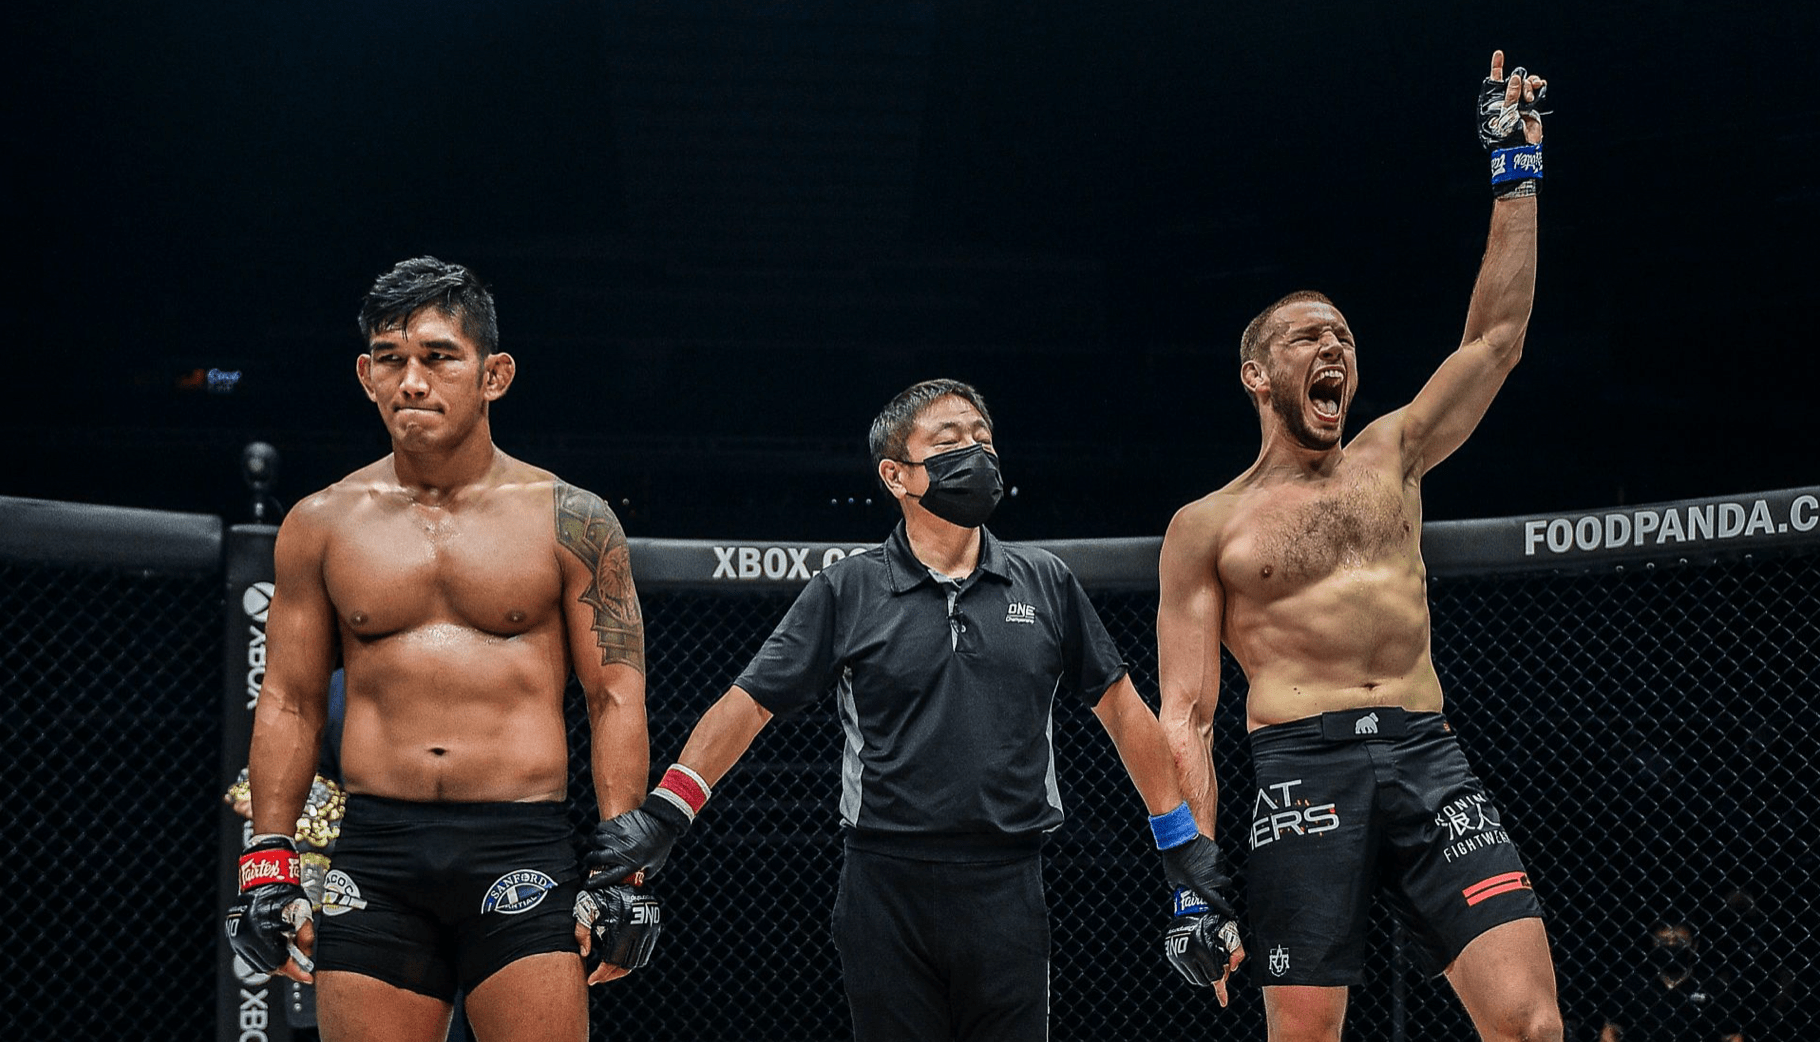 Reinier De Ridder Predicts Another Submission Win Against Aung La N Sang